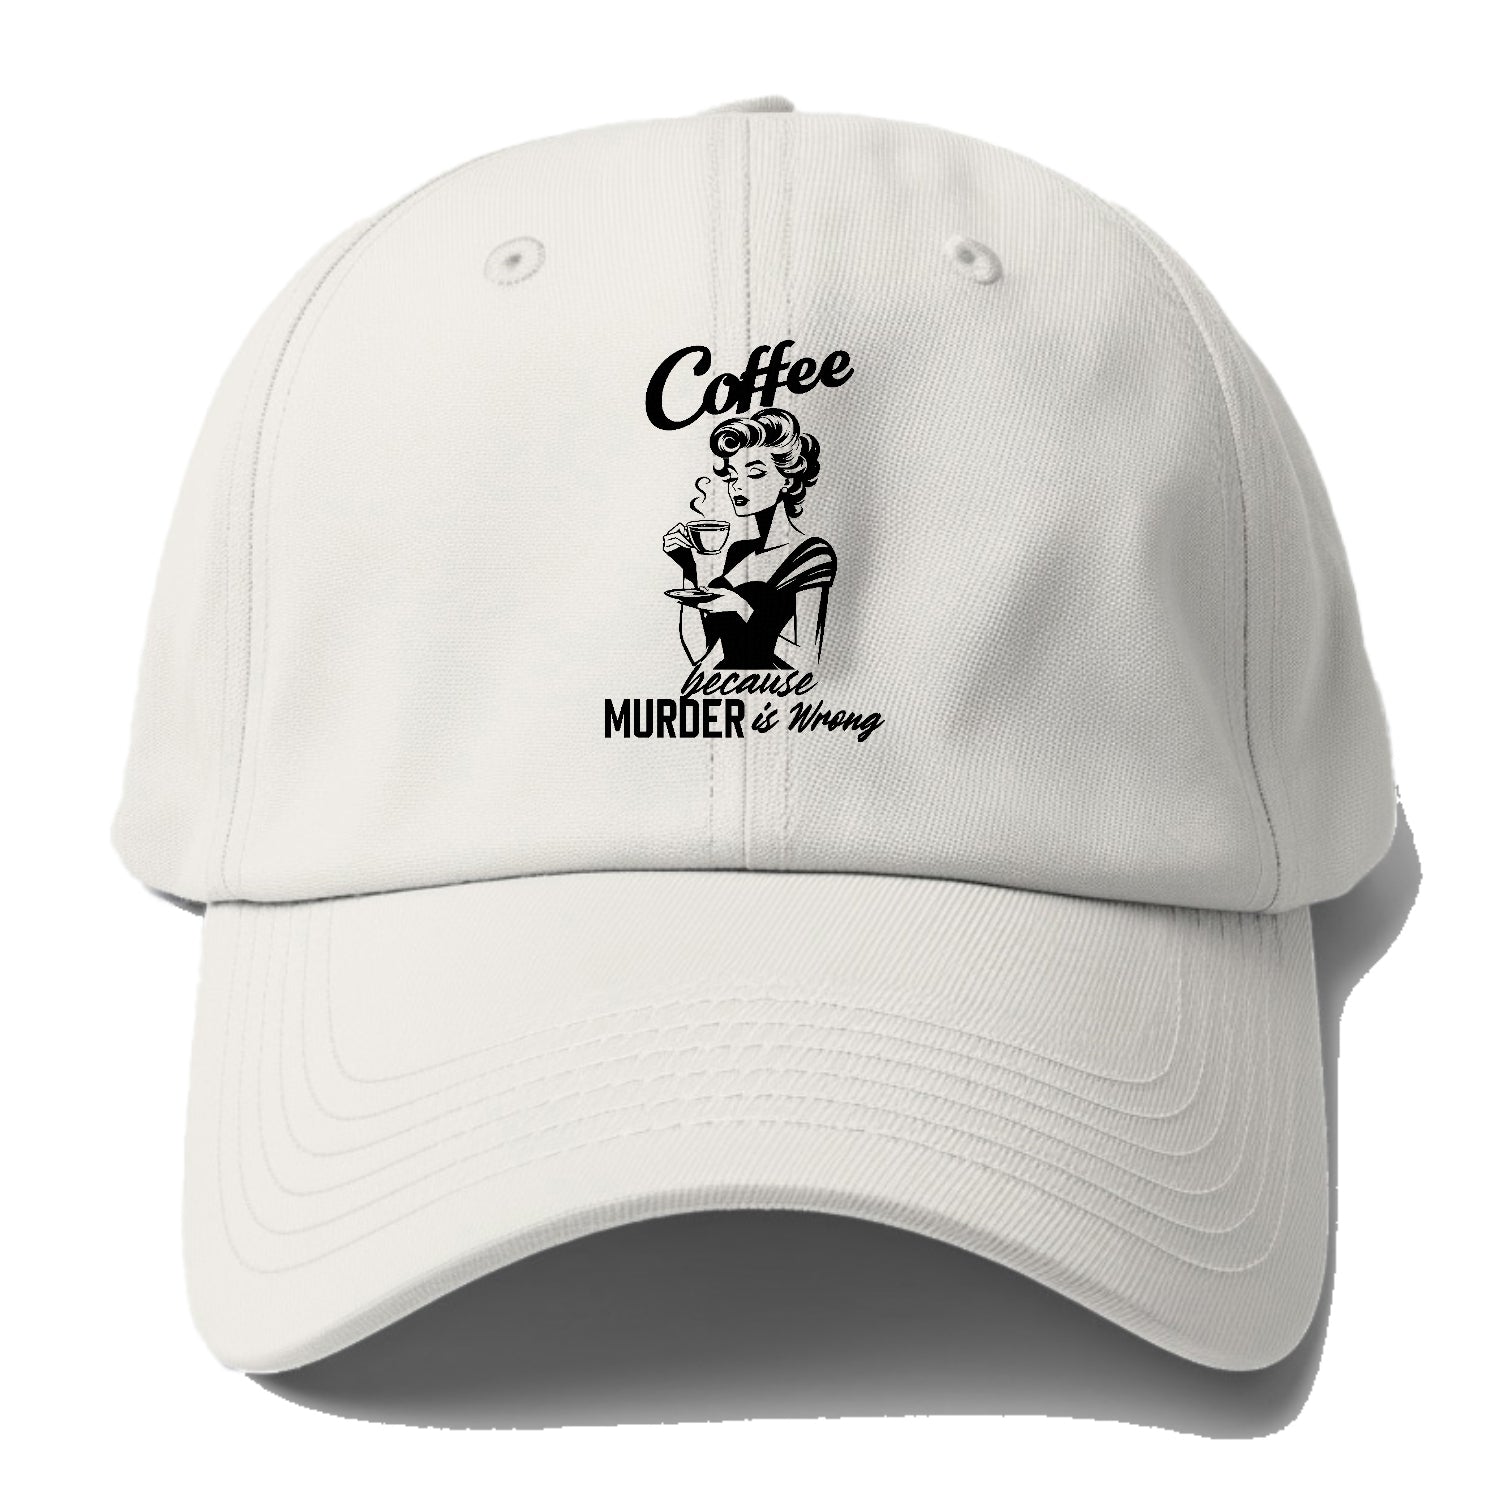 coffee because murder is wrong! Hat